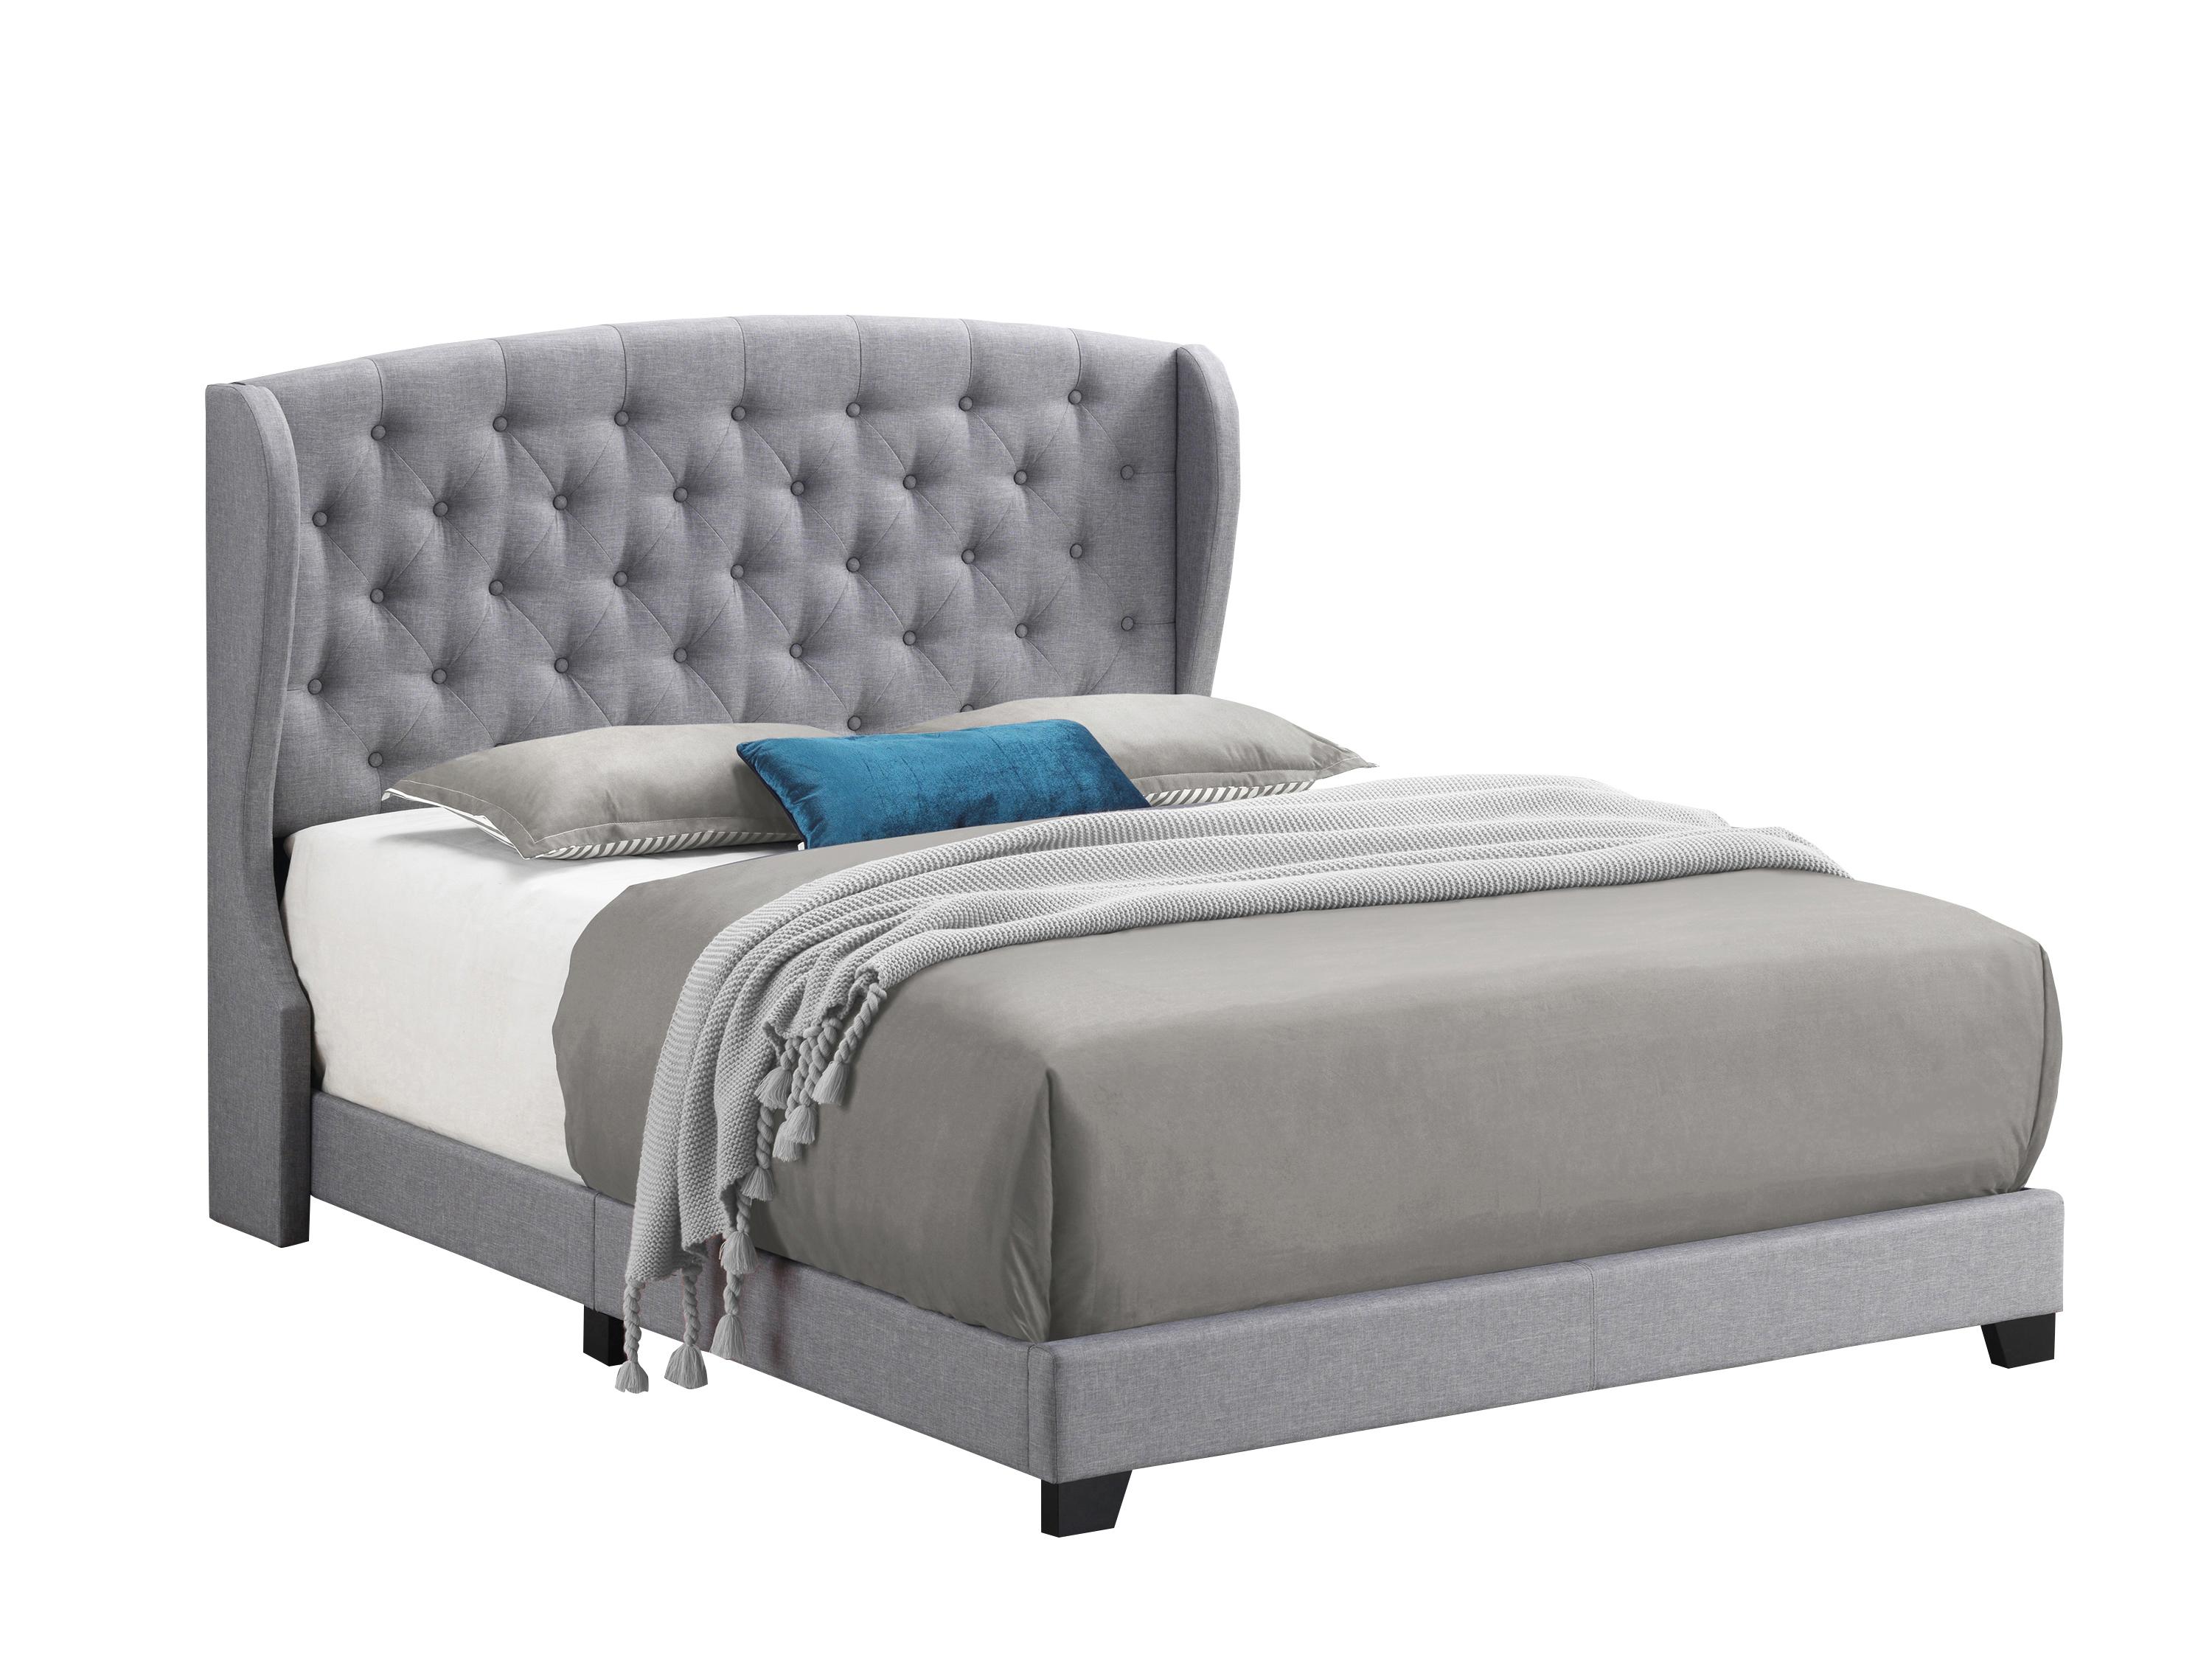 Contemporary Bed 305971Q Krome 305971Q in Smoke 